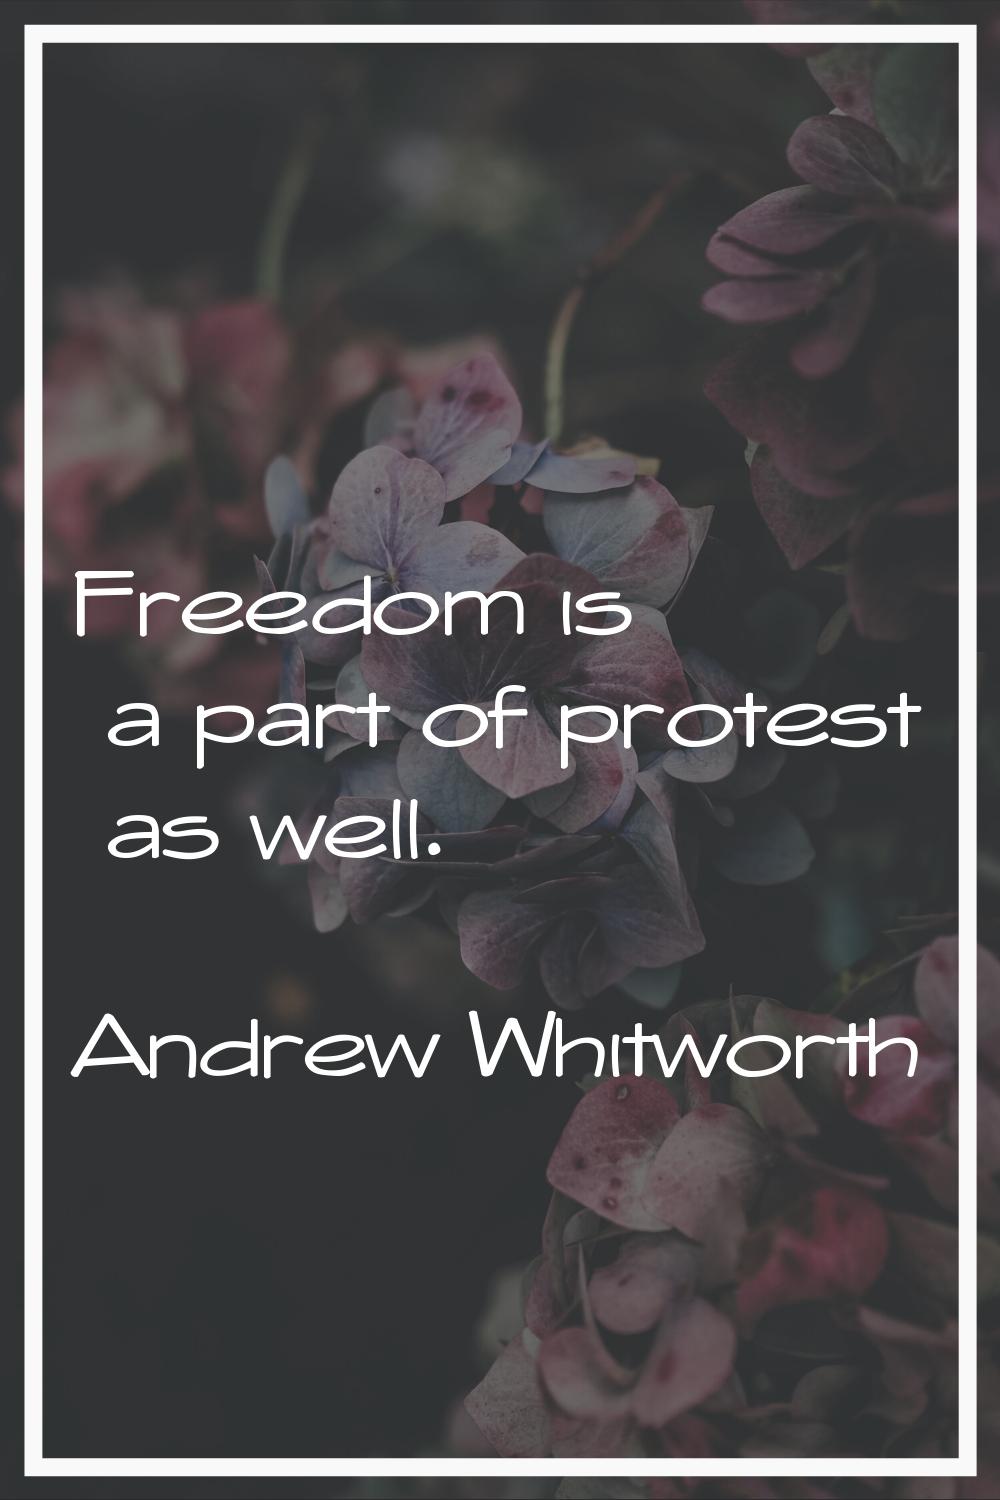 Freedom is a part of protest as well.